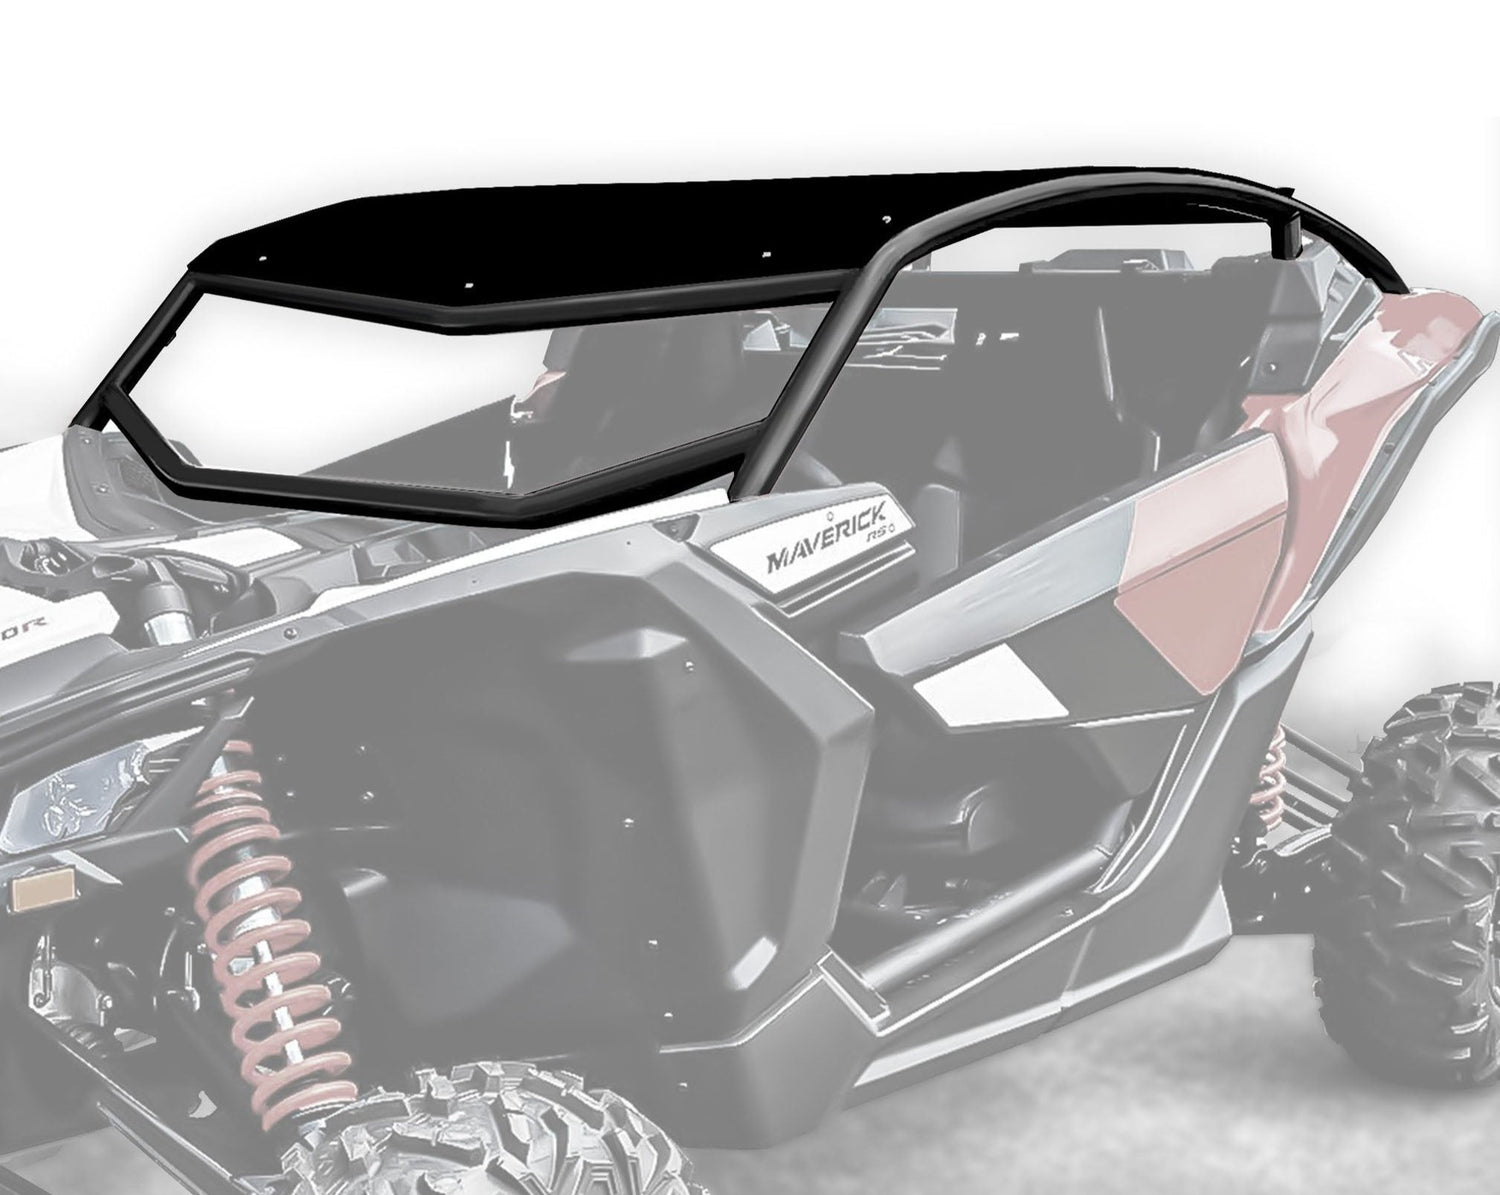 Thumper Fab - Can-Am Maverick X3 Cages: Safety, Durability & Style